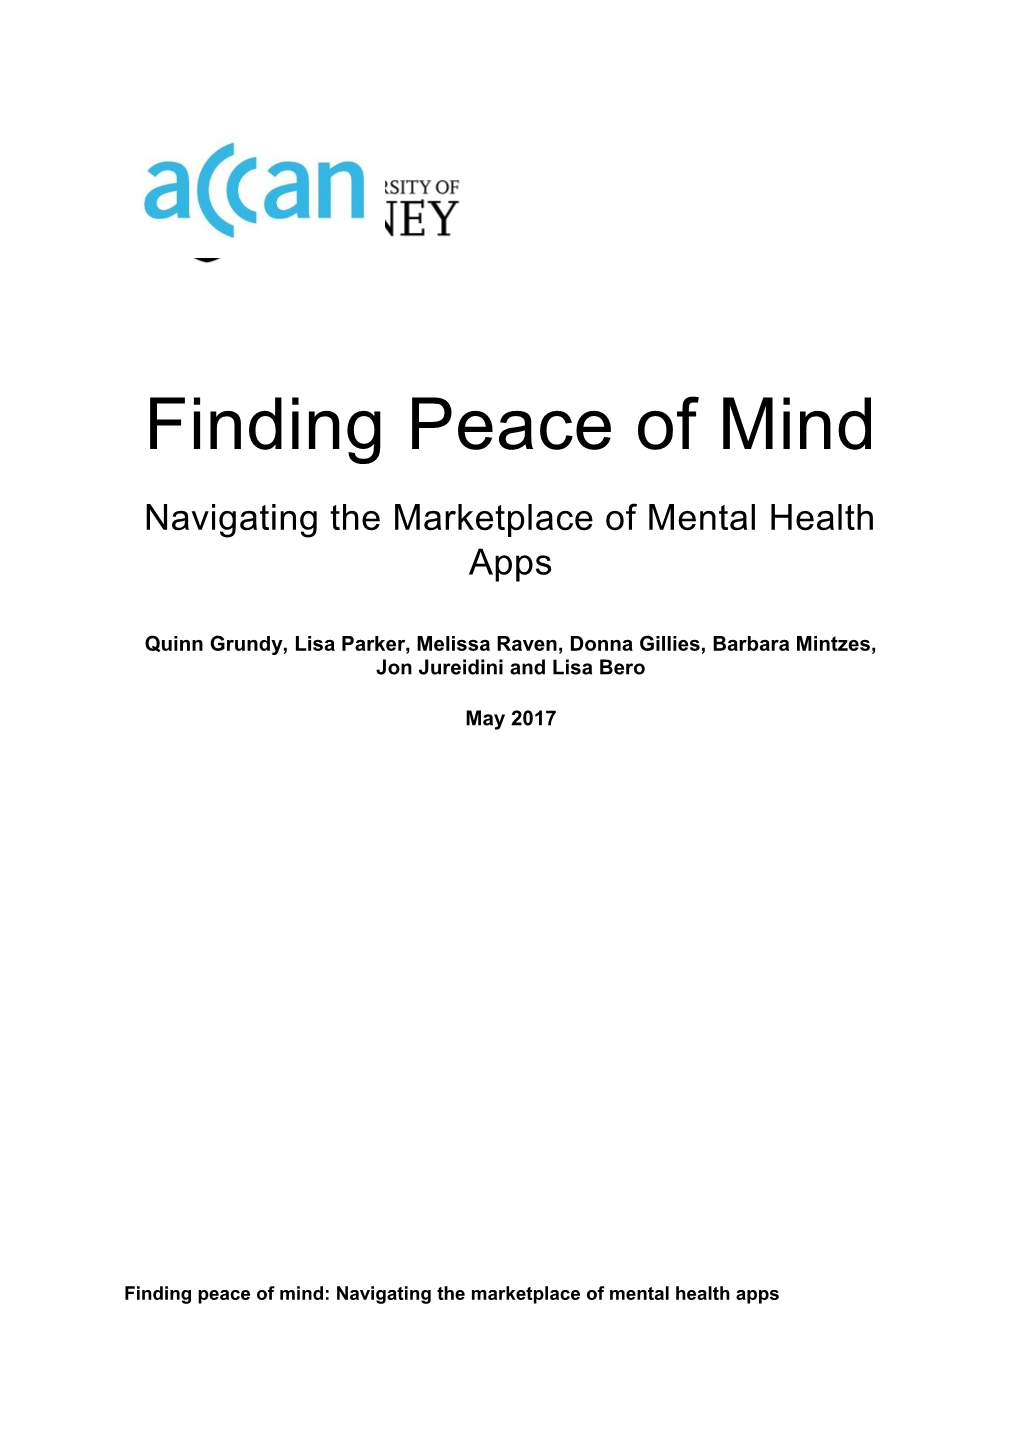 Finding Peace of Mind: Navigating the Marketplace of Mental Health Apps